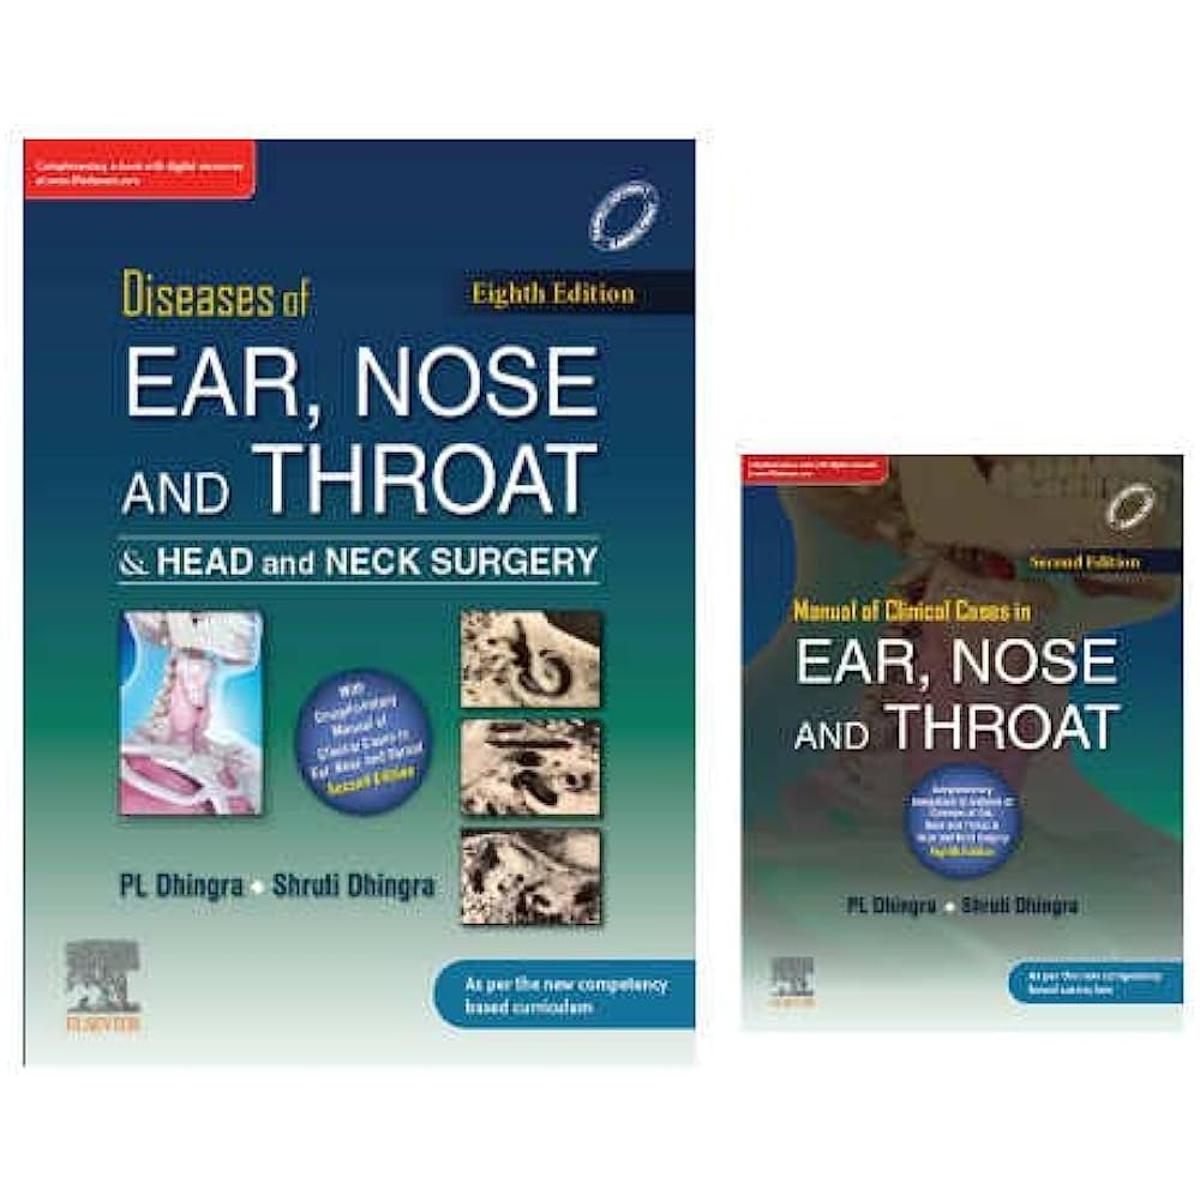 Diseases of Ear. Nose and Throat & Head and Neck Surgery by Dhingra